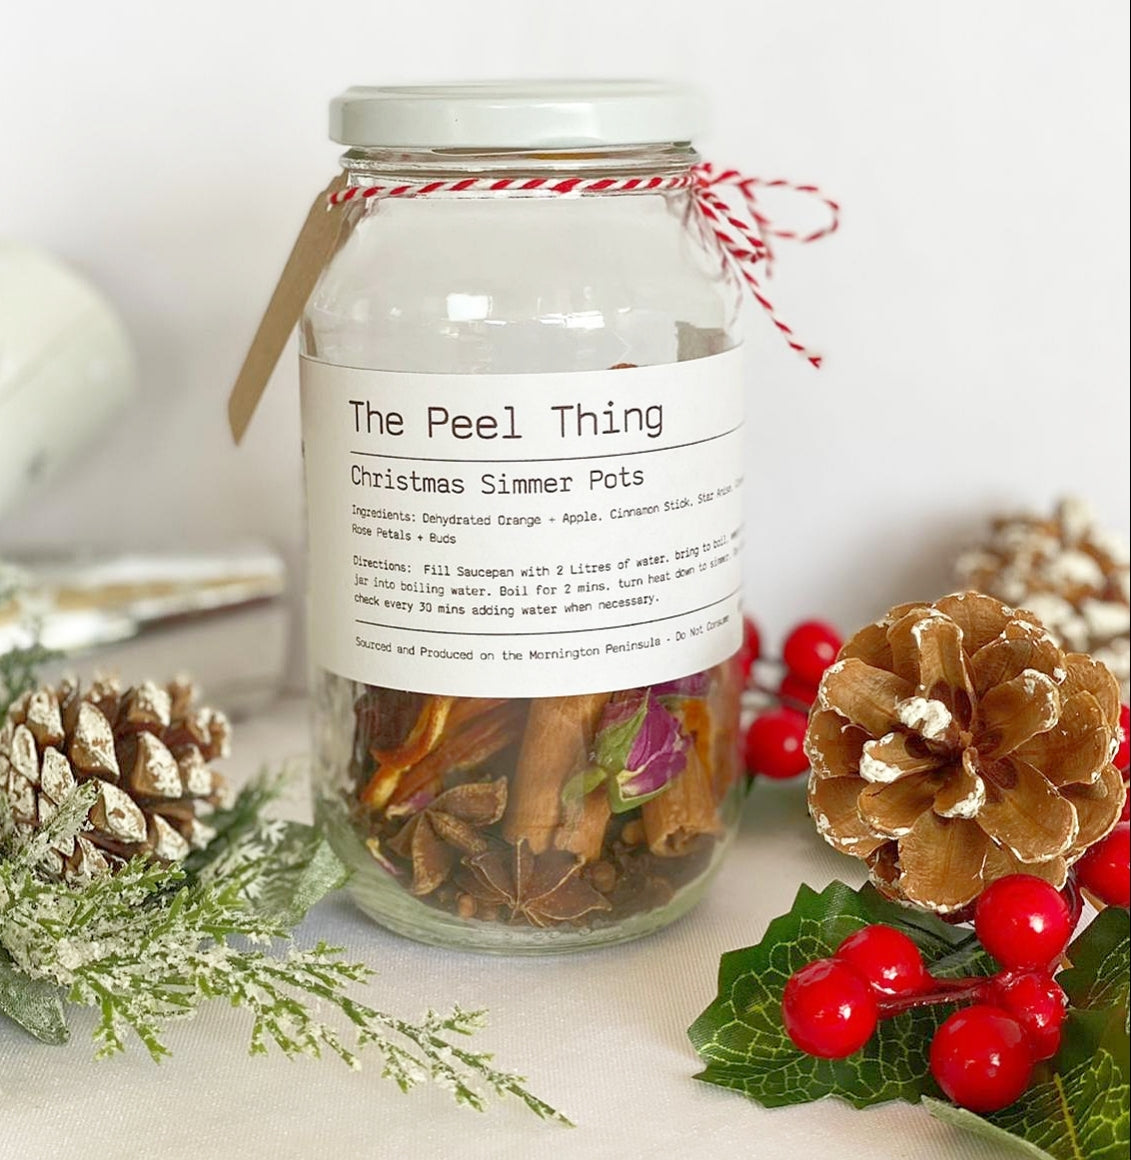 The Peel Thing Christmas Simmer Pots - 50gms